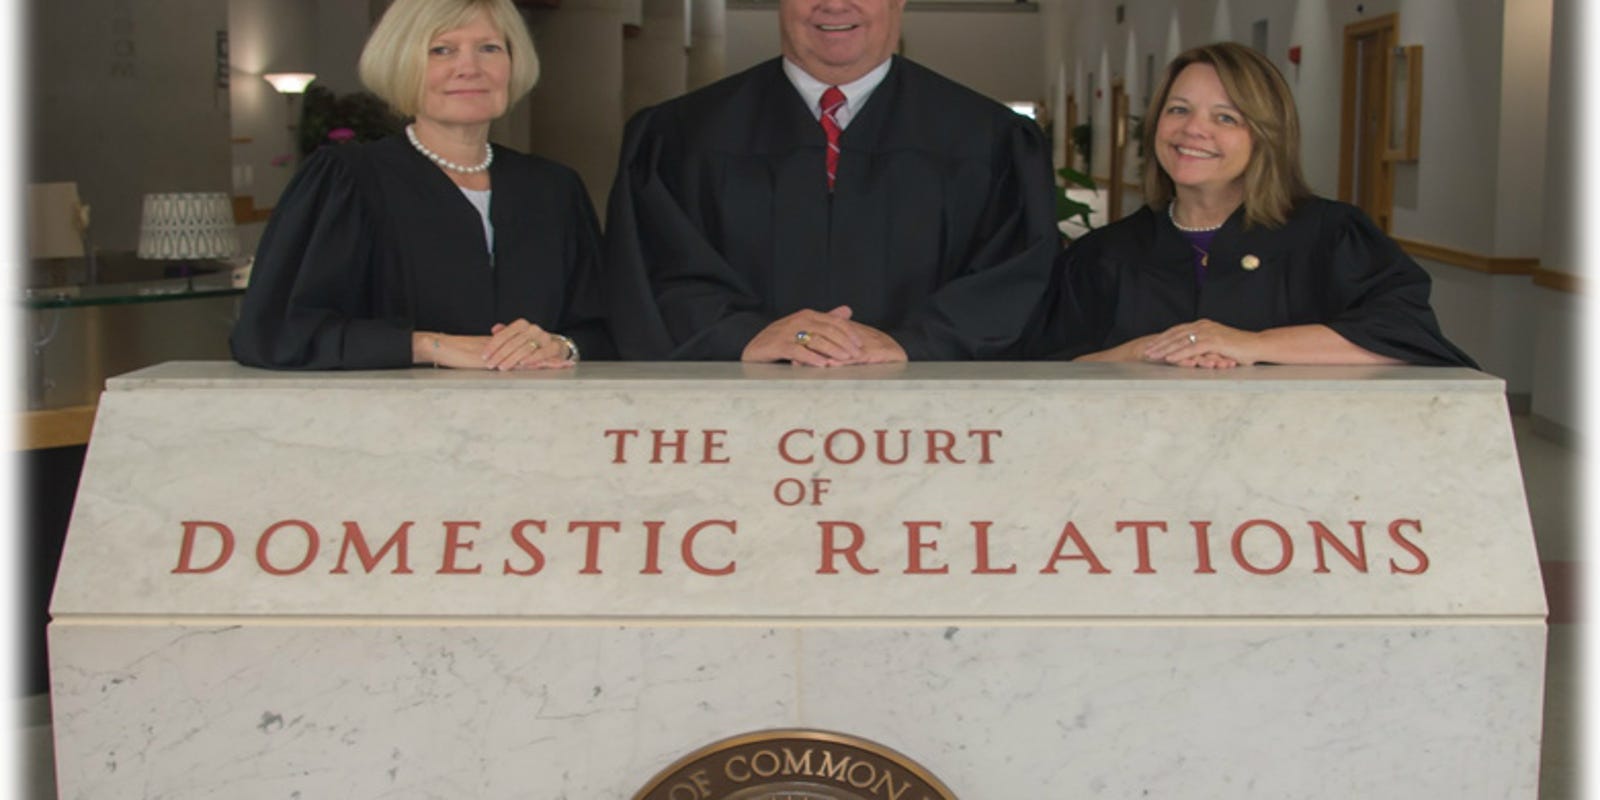 Opinion: Hamilton County Domestic Relations Court is working and safe